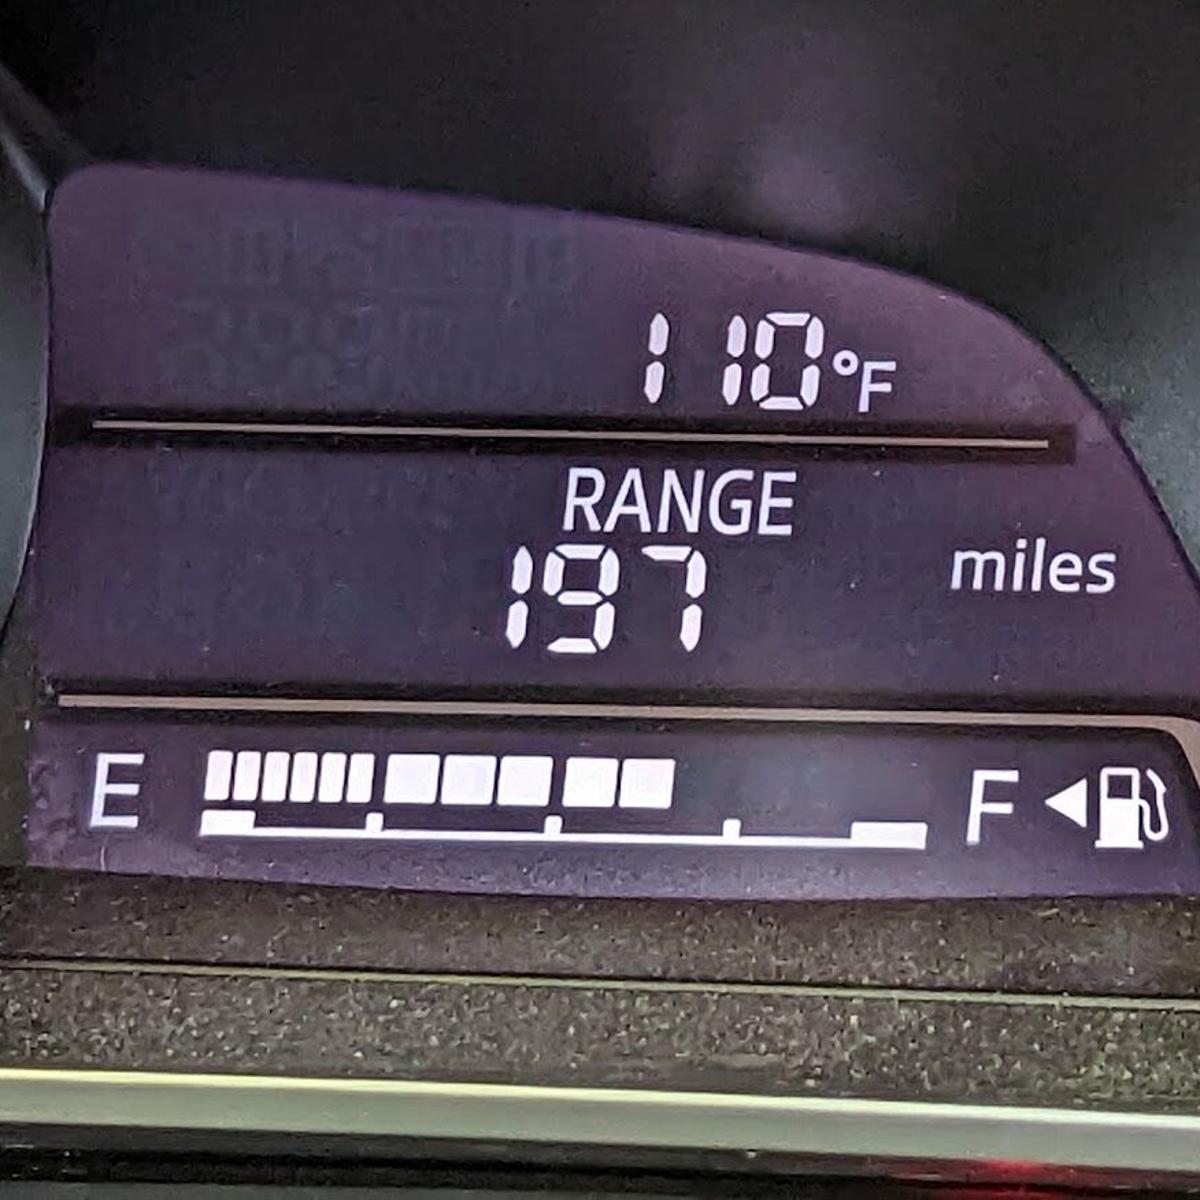 Here's why you shouldn't trust your car thermometer on hot days in the  South, Weather